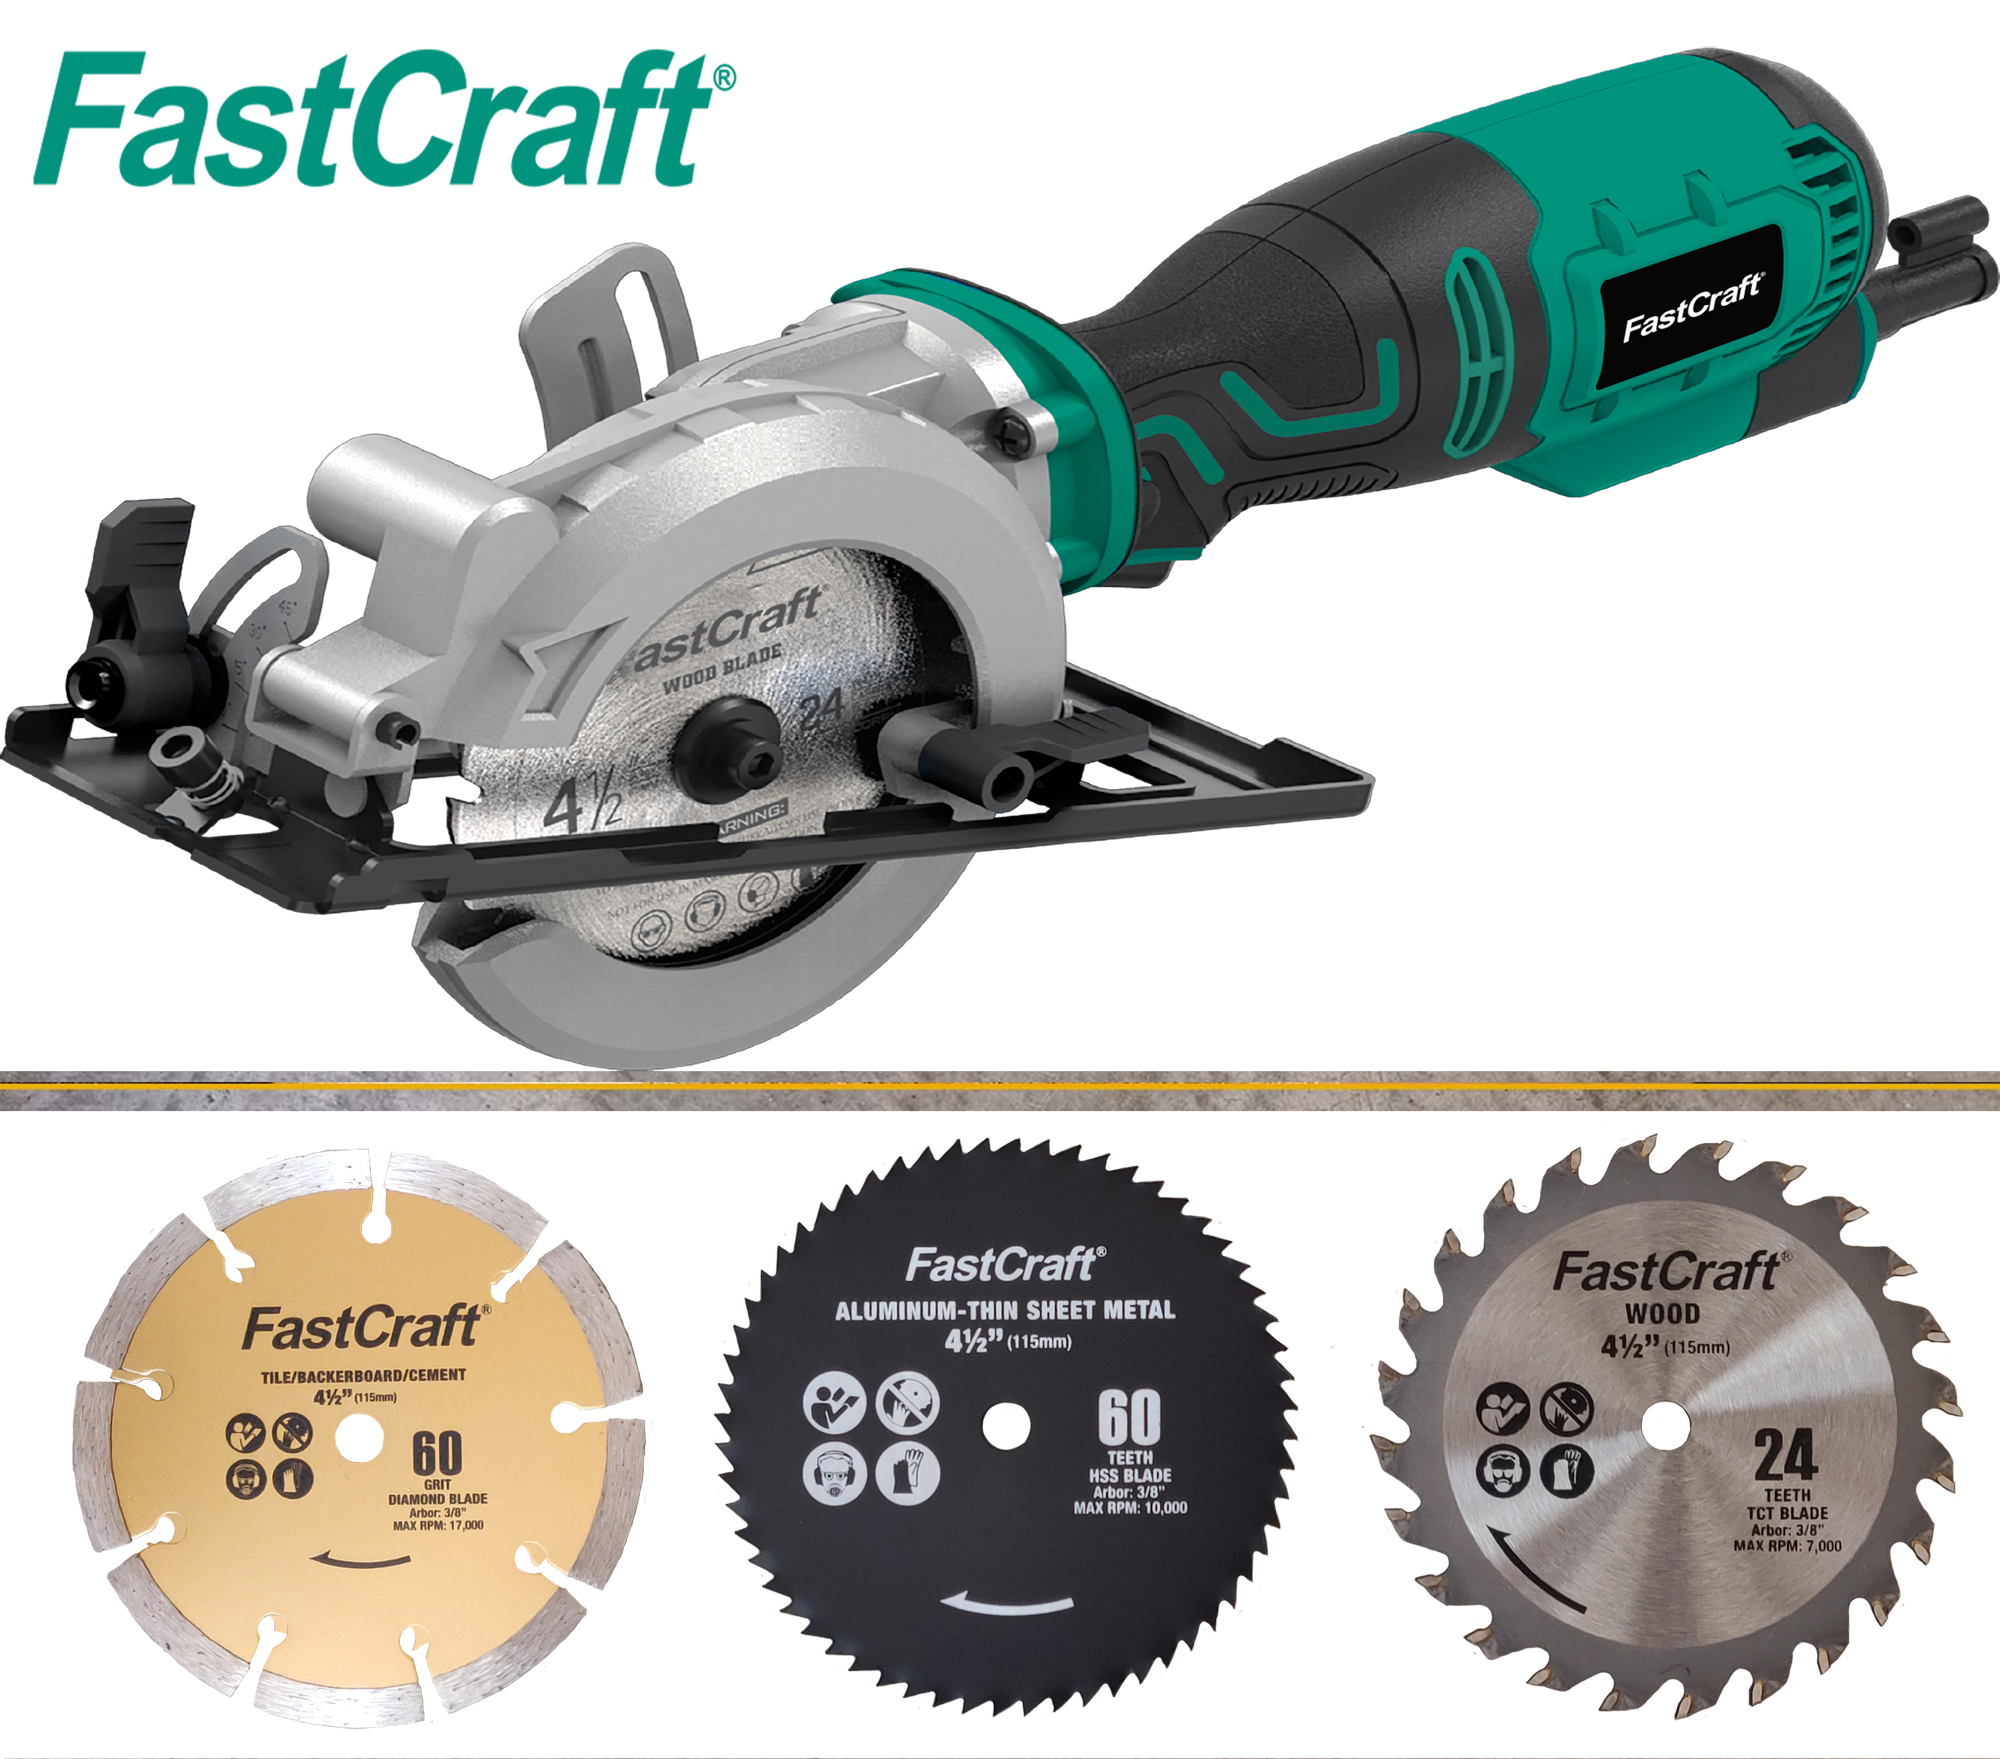 FastCraft, tool, tools, oscillating, blade, blades, FastCraft, multi, multi tool,woodworking,twist,diamond blade,saw,nut setters,insert bits,adapters,router bits,glass,tile,construction,Lawn Garden Tools - Trimmers,metal working, high speed steel, twist drill bits, insert bit, bit, bits,HSS M7, M2, GB9341, GB4341, GB4241, M35 jobber, stubby, long type, aircraft extension, taper shank, twist drill bits, saw drill, end mills, woodworking tools, brad point drill bits, spade wood boring bits, forstner bits, saw drills, holesaws,carbide router bits, carbide glass/tile drill bits, masonry drill bits,carbide hammer drills, files/rasps, wire brushes, nut drivers, nutsetters,drill/drive tools, quick-change featured products, diamond saw blades, cordless drills, diamond saws, tool sets, tool kits, carbide router bits, SDS plus, brush, file, rasp, SDS Max, Spline, hand tools, brad point, ship auger bits, spade wood bits, insert bits, nutsetters,holesaws, quick change, forstner bits, router bits, masonry drills, twist drill, drill blanks, power tool, saw, saw blade, saw blades, grinder, sanding, sand, grind, reciprocating, chuck